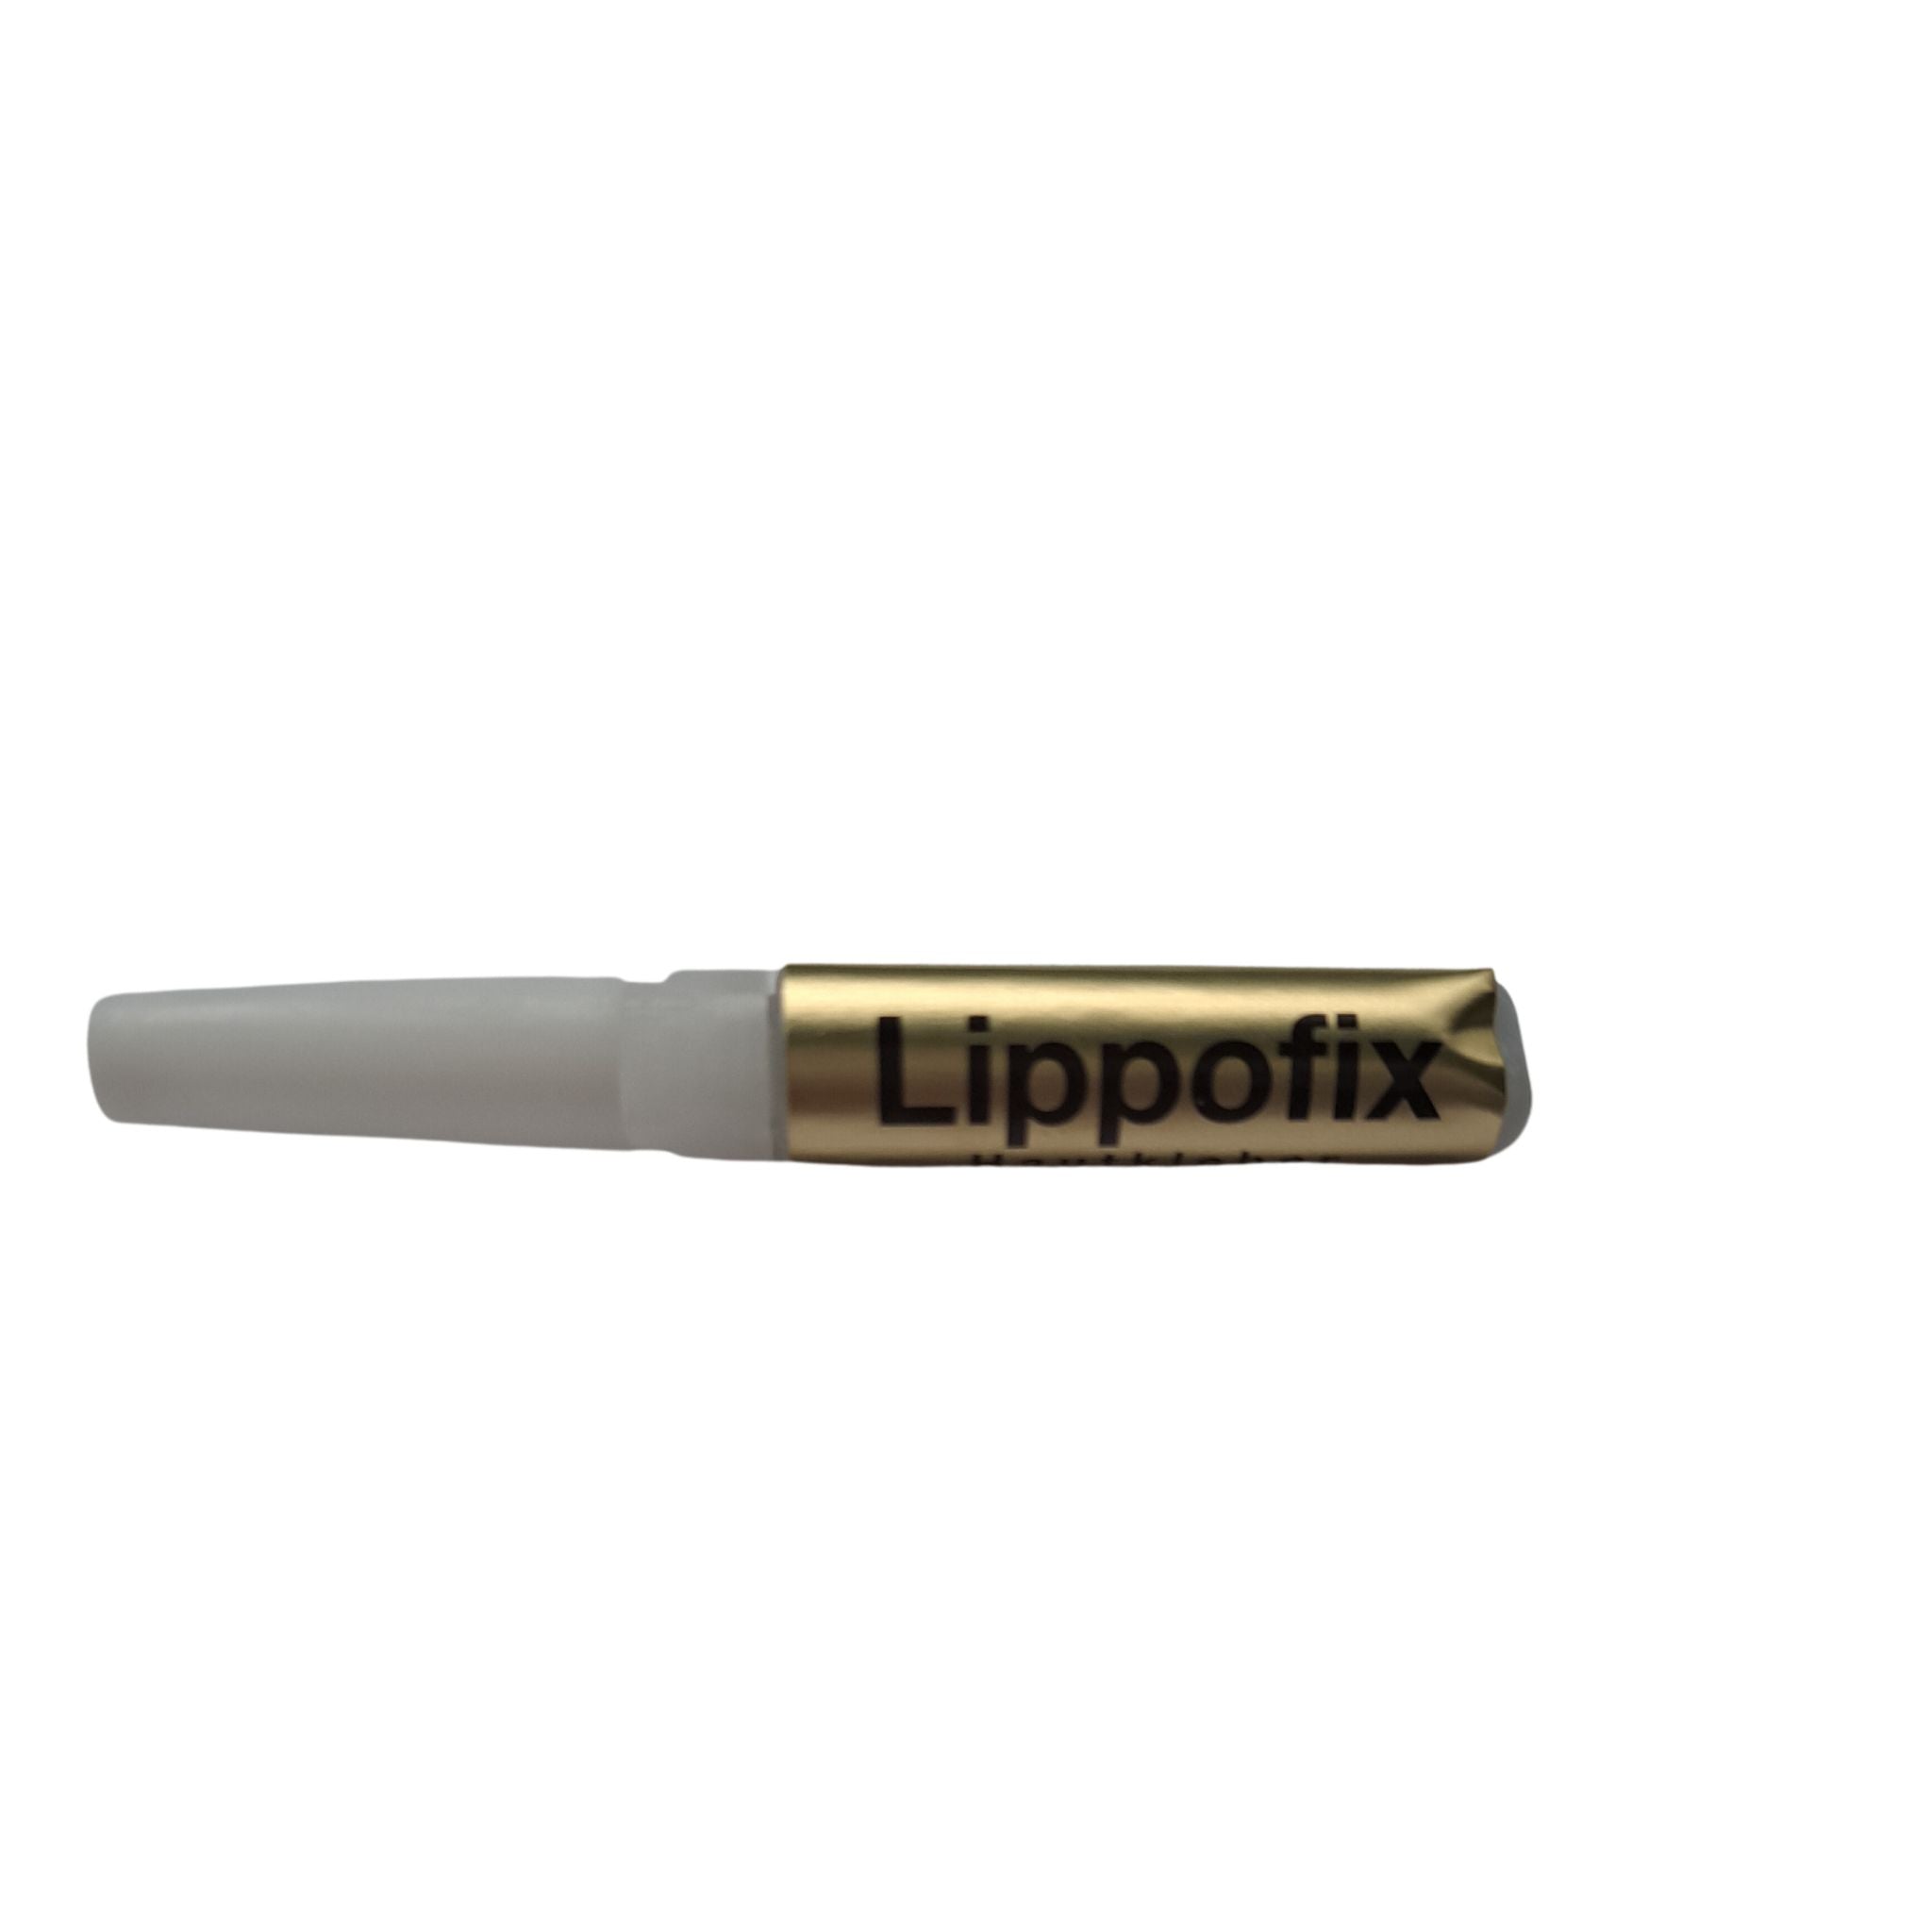 Lippofix eye, mouth and wound adhesive 5 pipettes